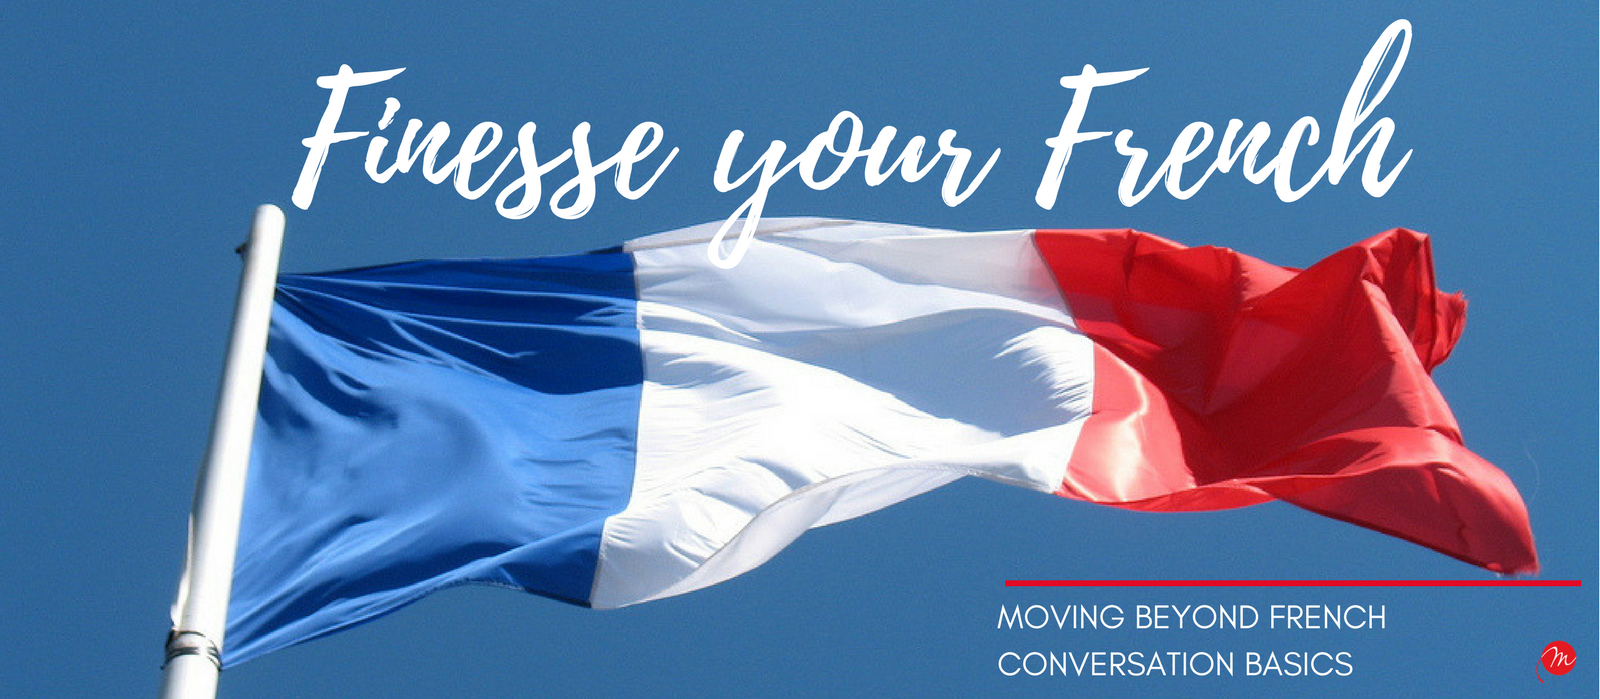 MyFrenchLife.org - My French Life™ - Finesse your French - Moving beyond French Conversation Basics - Header